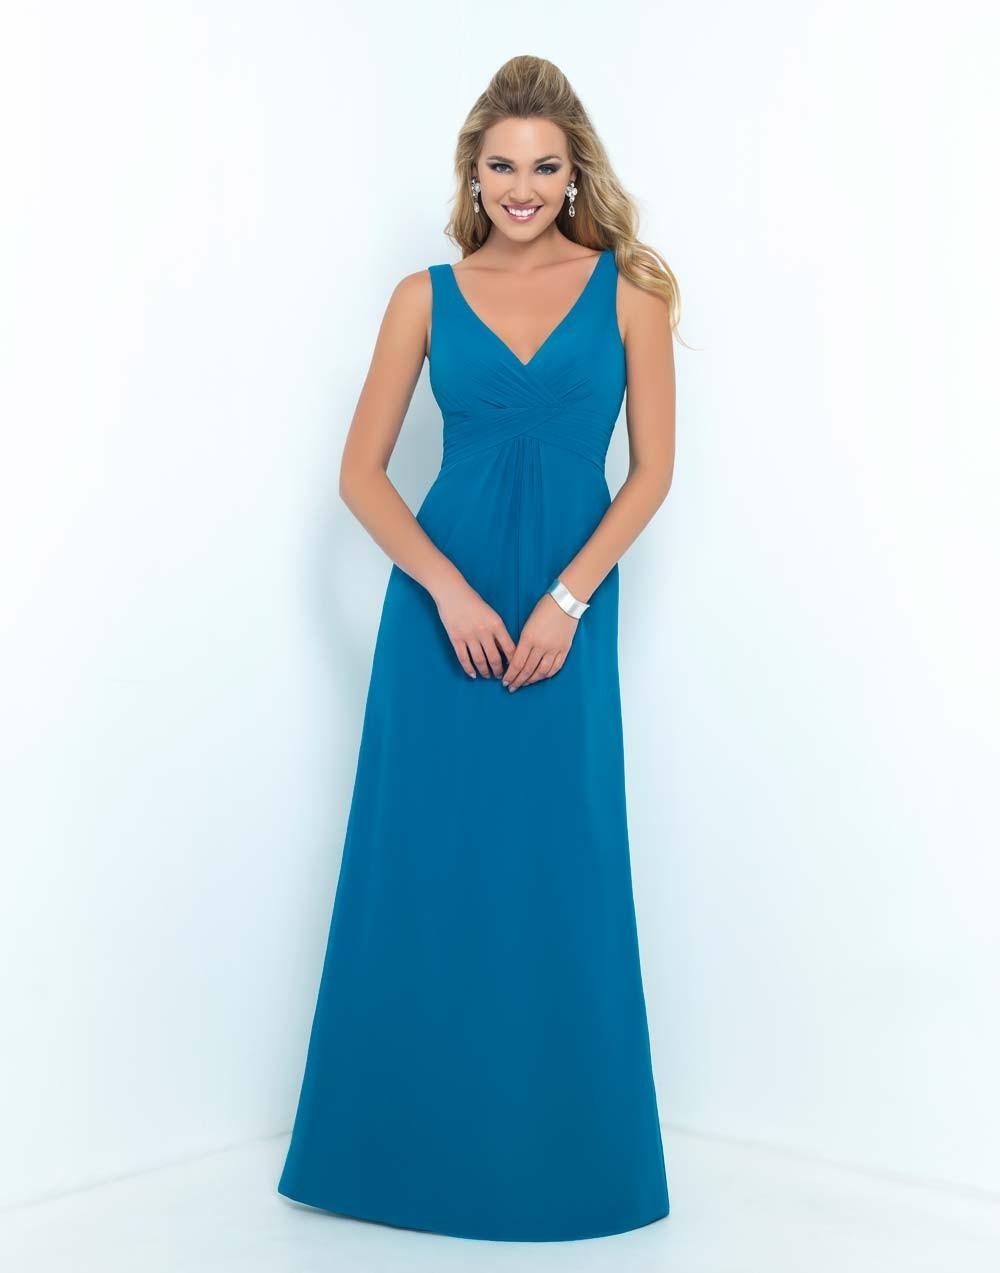 Teal Bridesmaid Dresses: 15 of Our Favourite Styles - hitched.co.uk ...